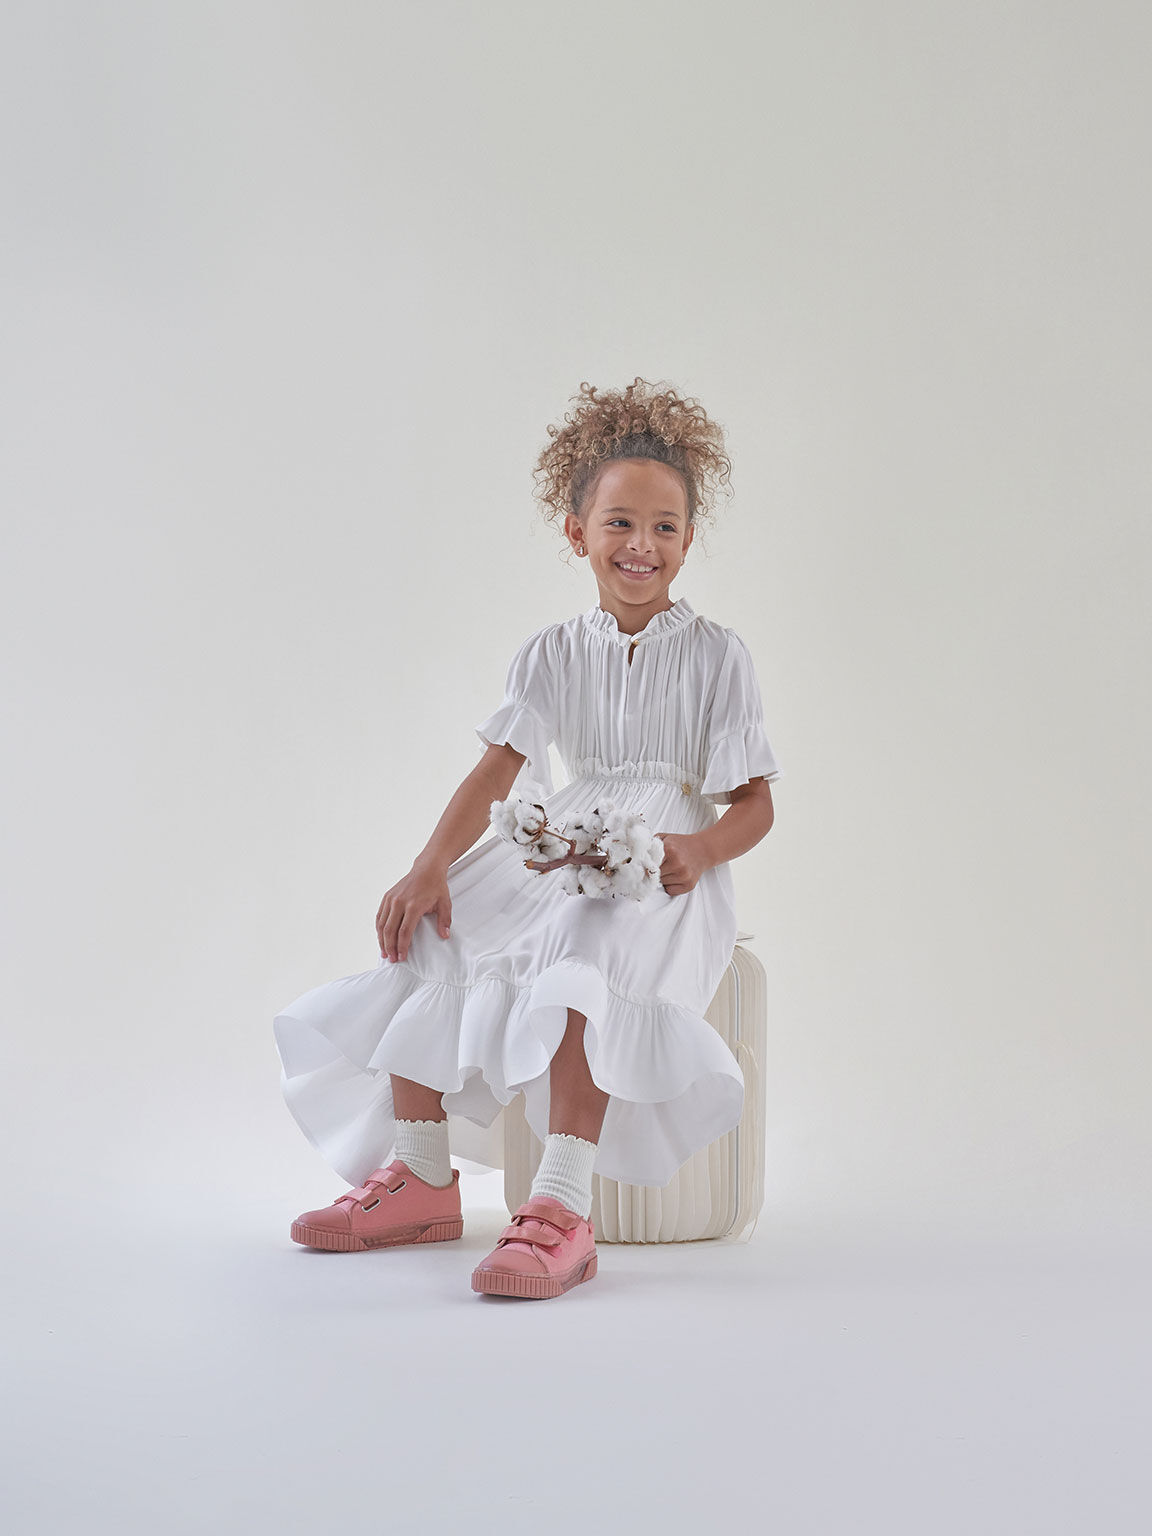 Purpose Collection 2021: Girls' Organic Cotton Sneakers, Pink, hi-res